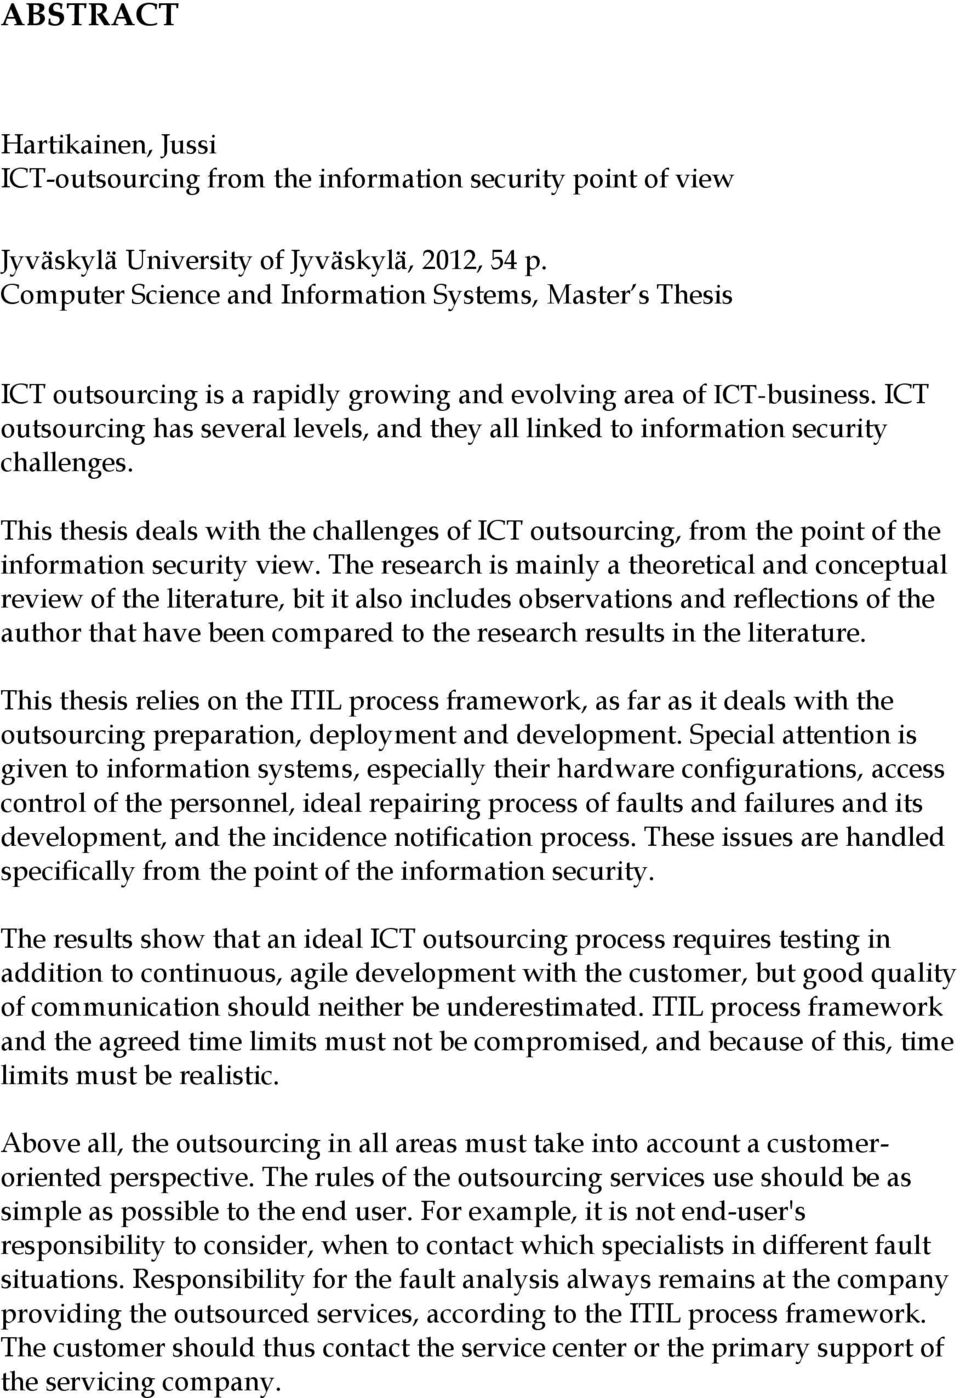 ICT outsourcing has several levels, and they all linked to information security challenges. This thesis deals with the challenges of ICT outsourcing, from the point of the information security view.